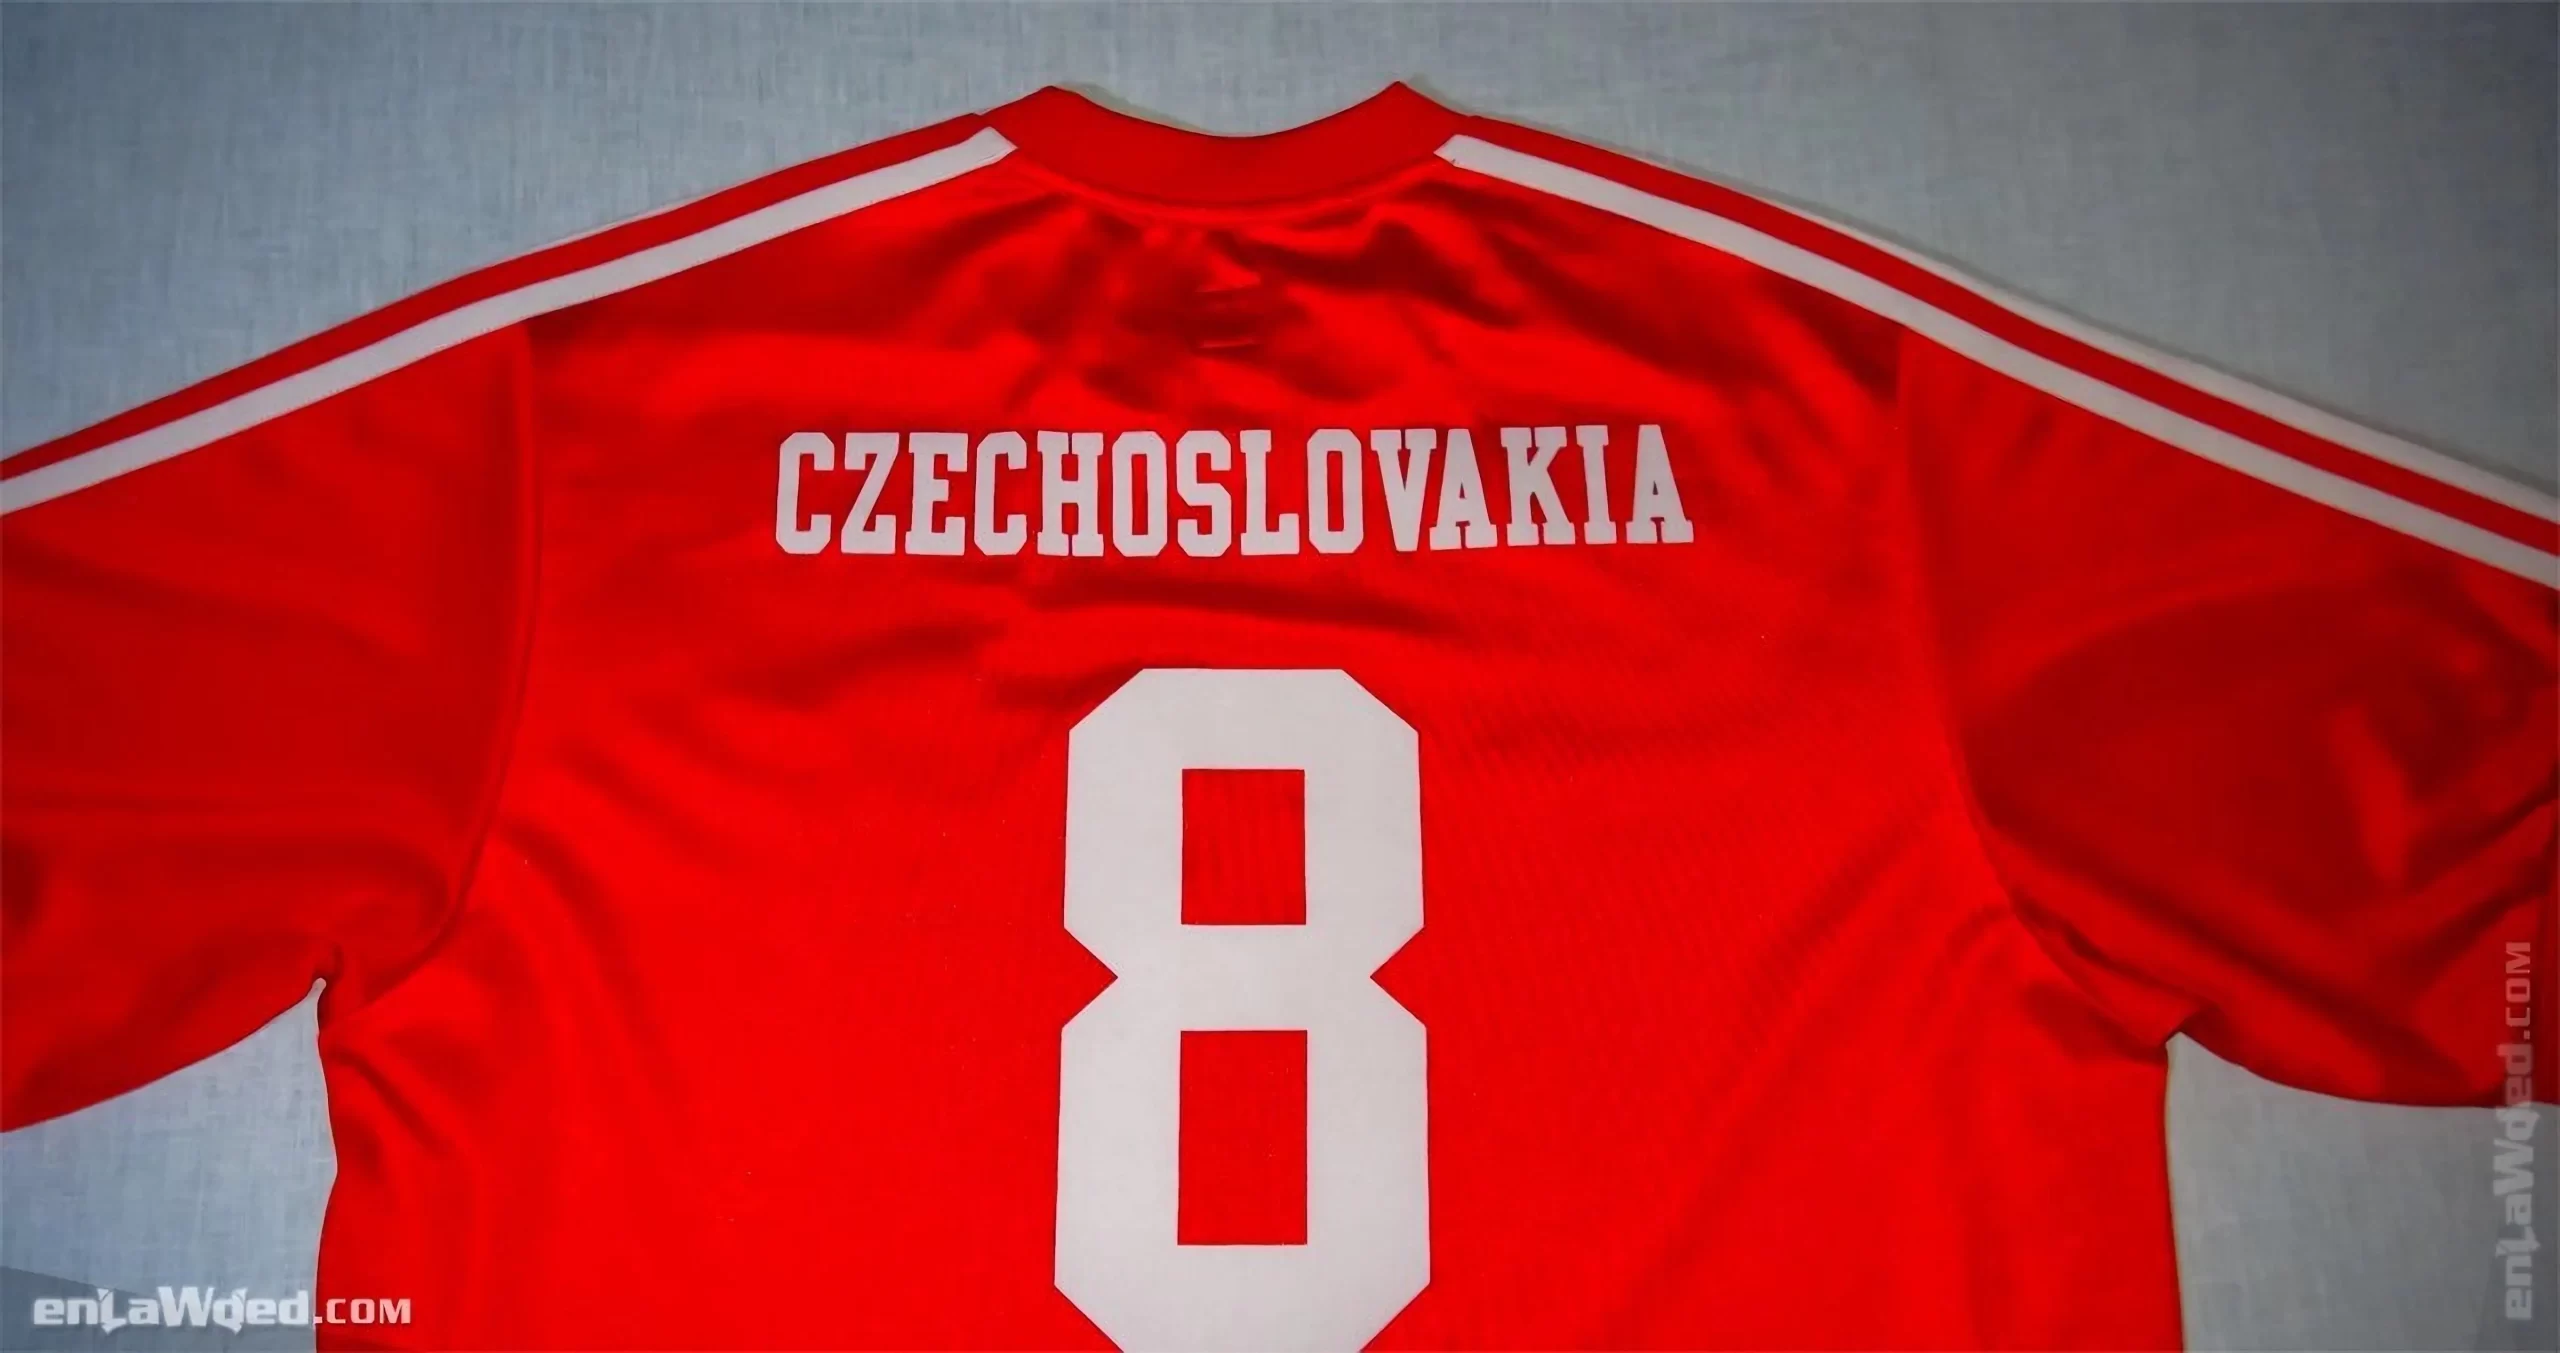 Men’s 2006 Panenka ’76 Czechoslovakia Jersey by Adidas: Reliable (EnLawded.com file #lmcf9vn2qkmr414i64a)